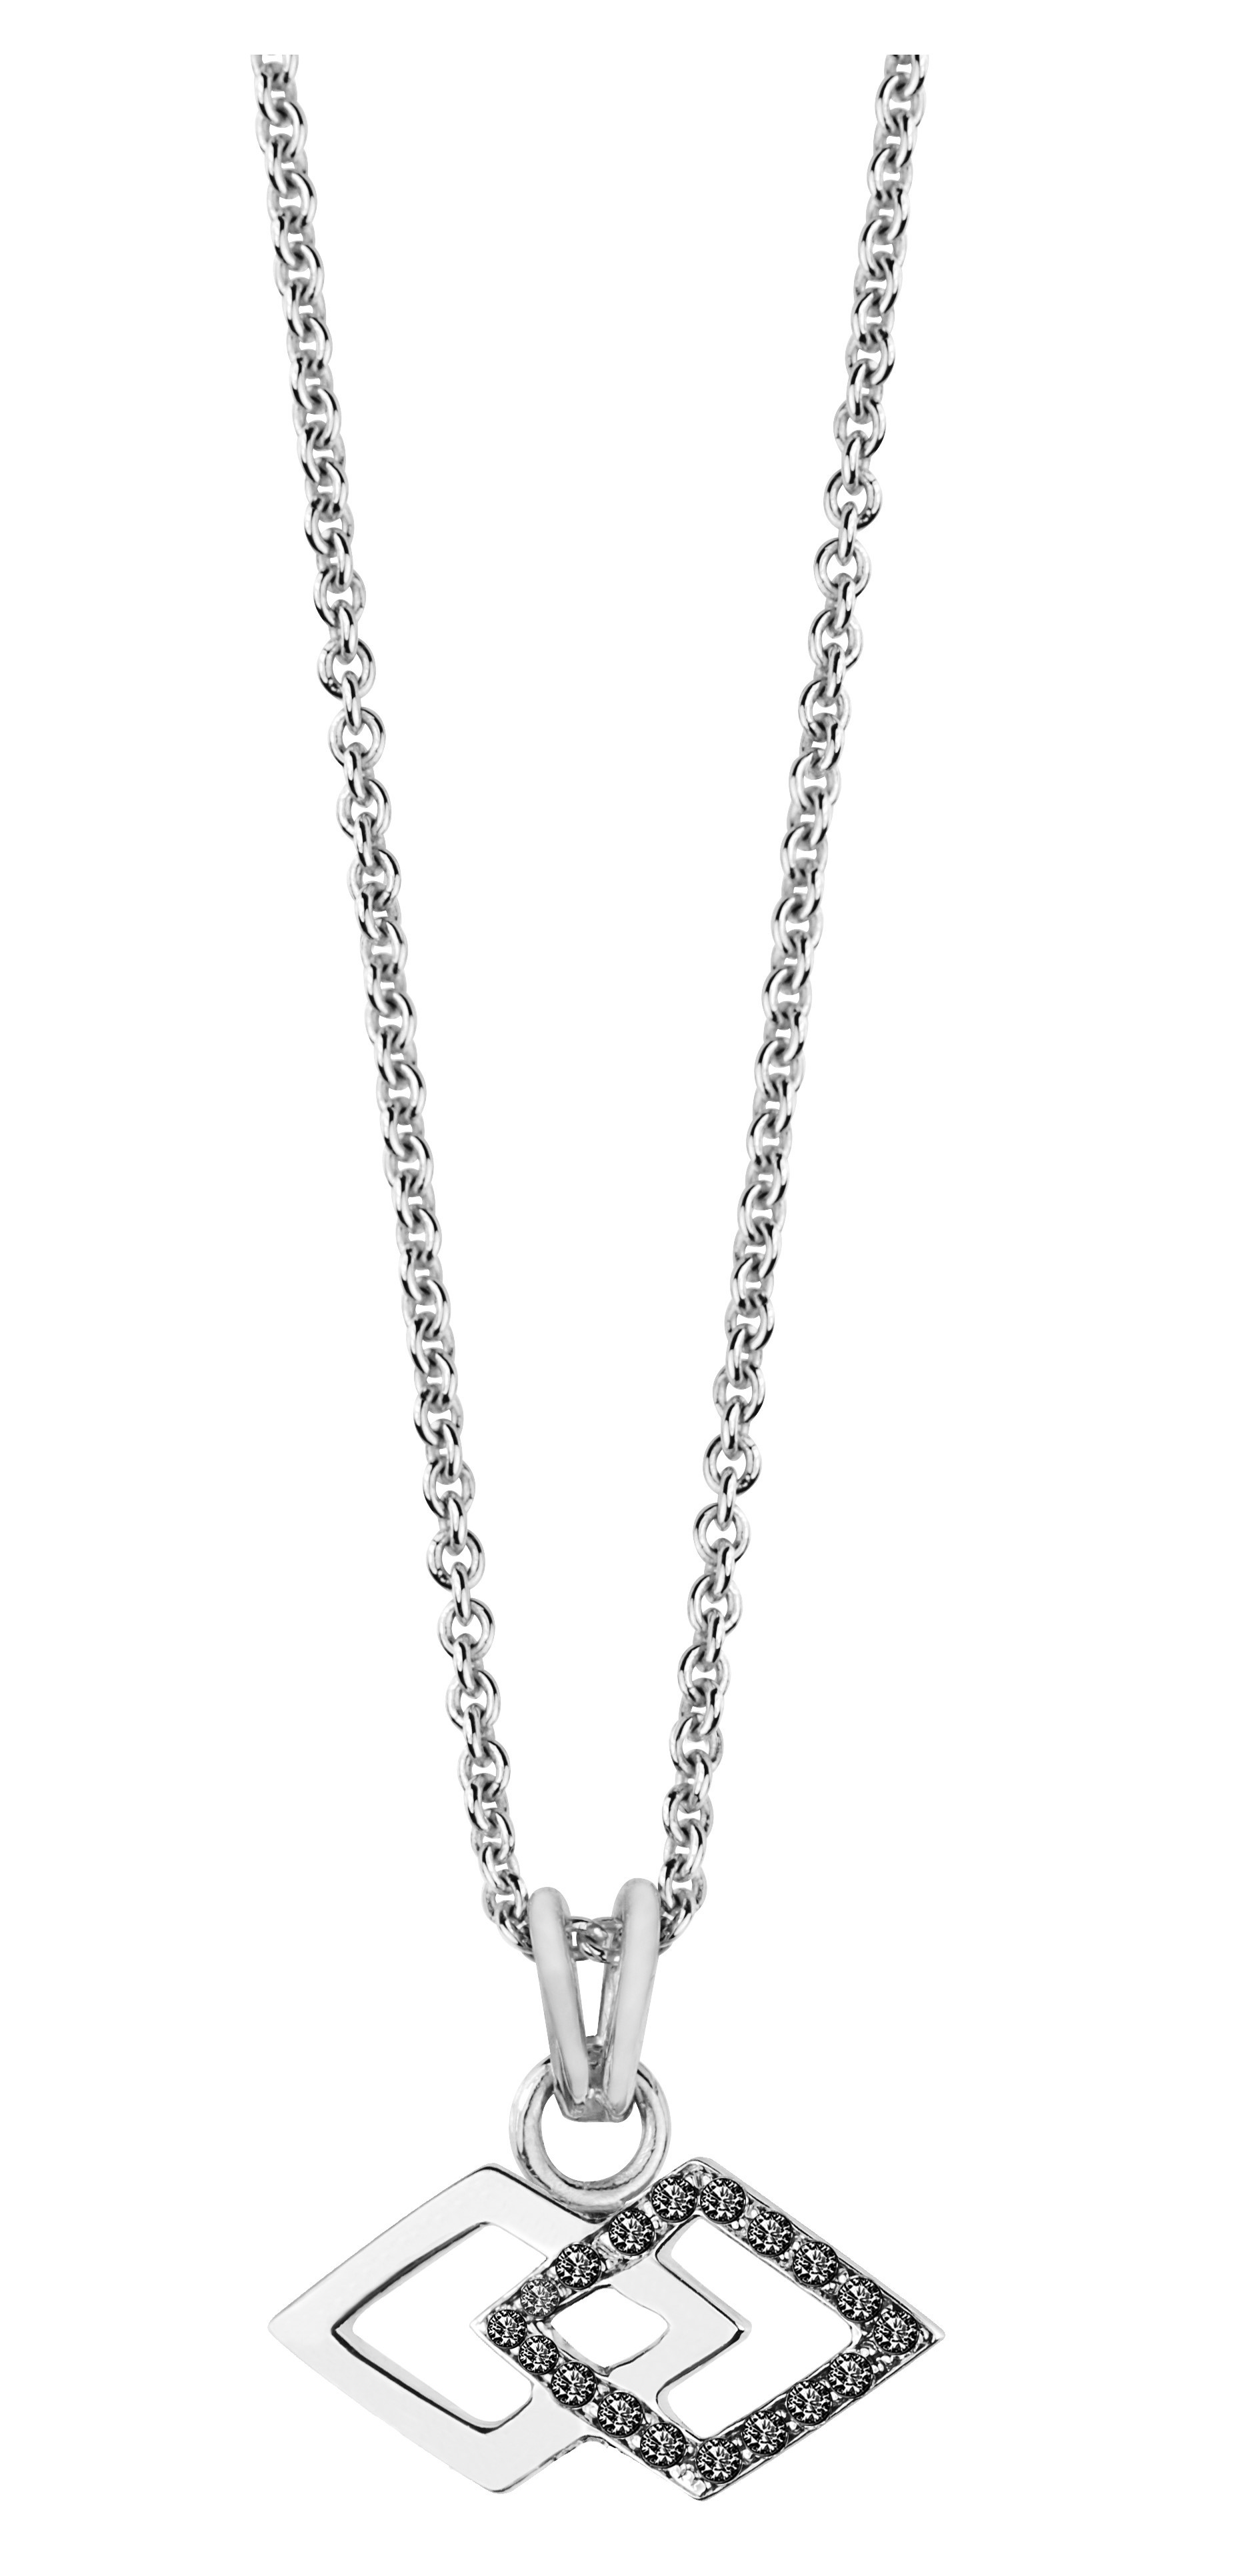 Justice Bakwani7 Or diamants noirs – Collier